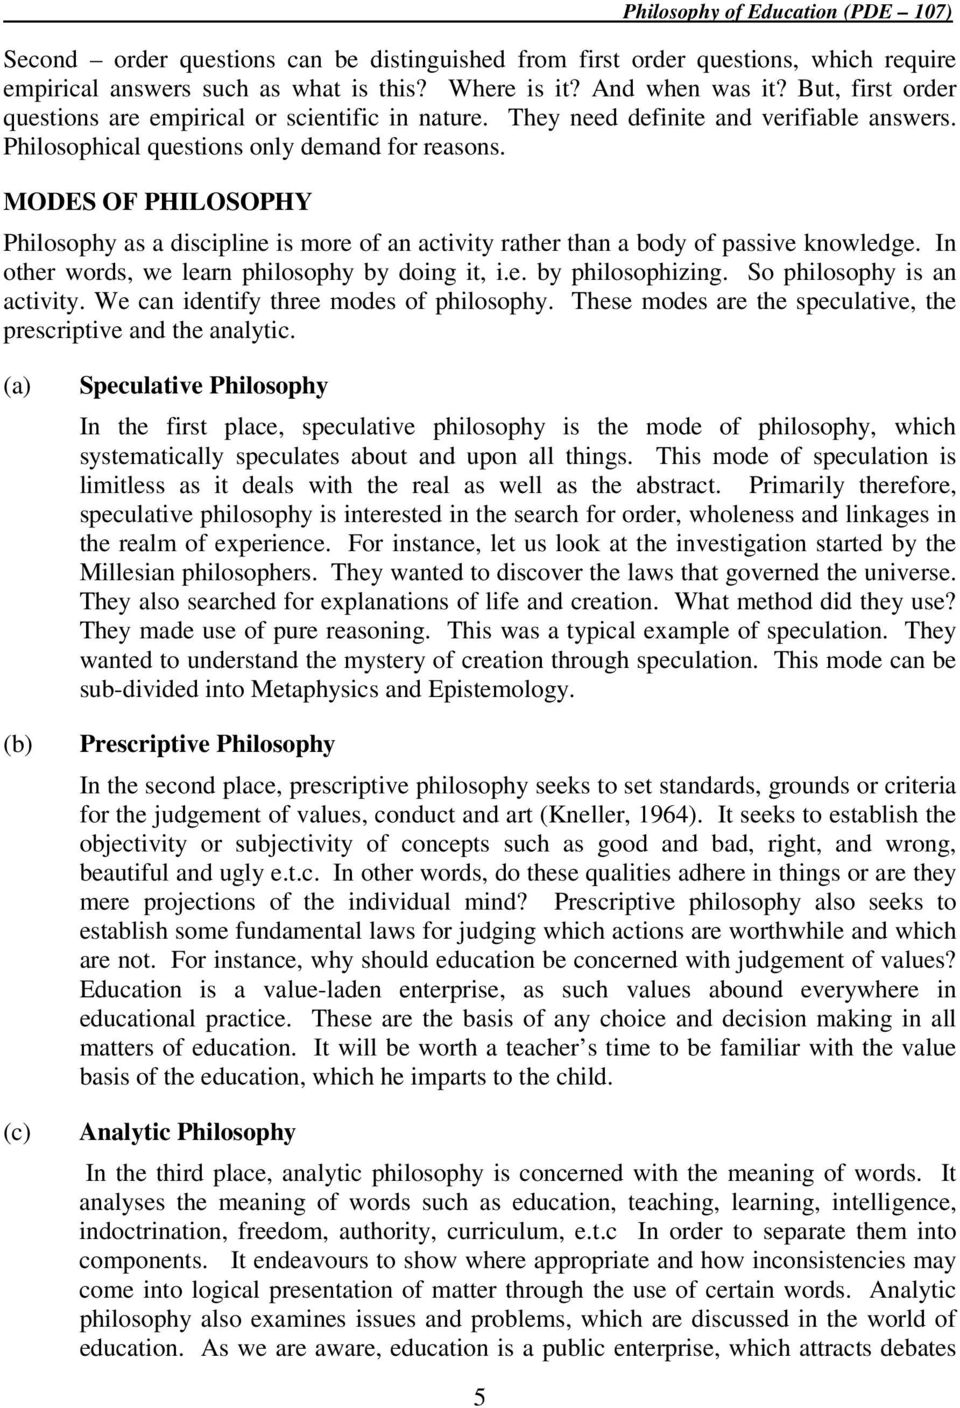 analytic and speculative philosophy